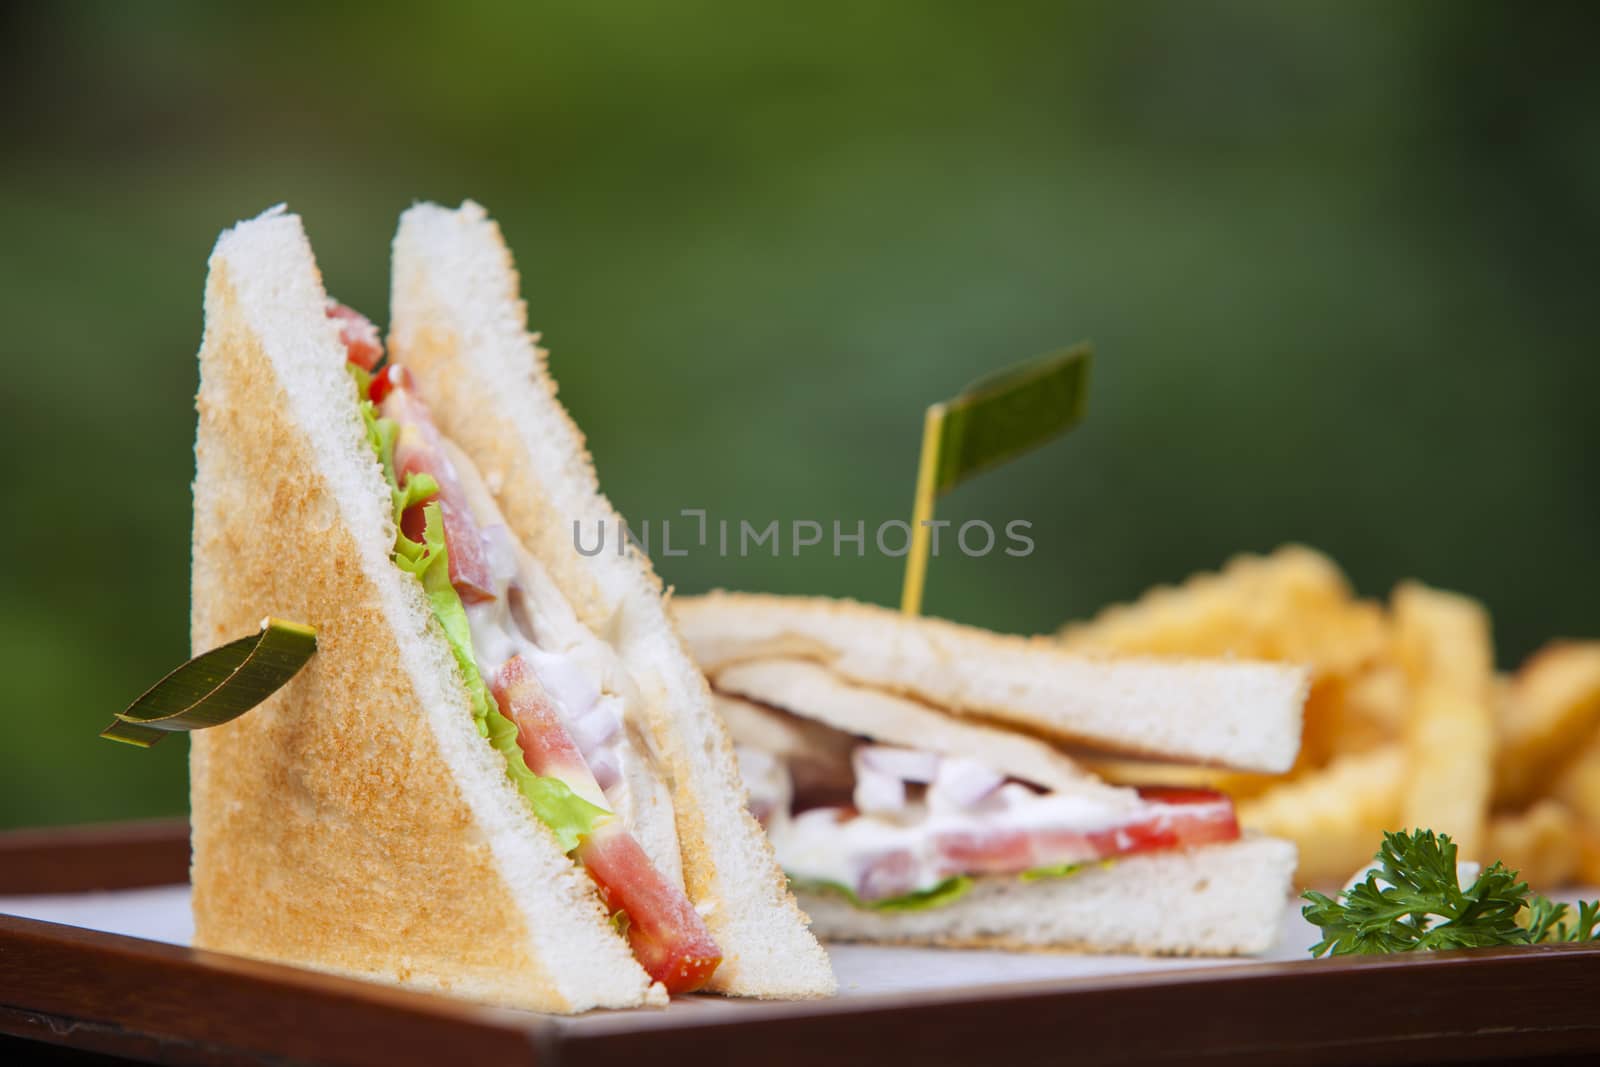 Healthy sandwich made of a fresh salad and tomatoTasty and fresh sandwiches on green background.